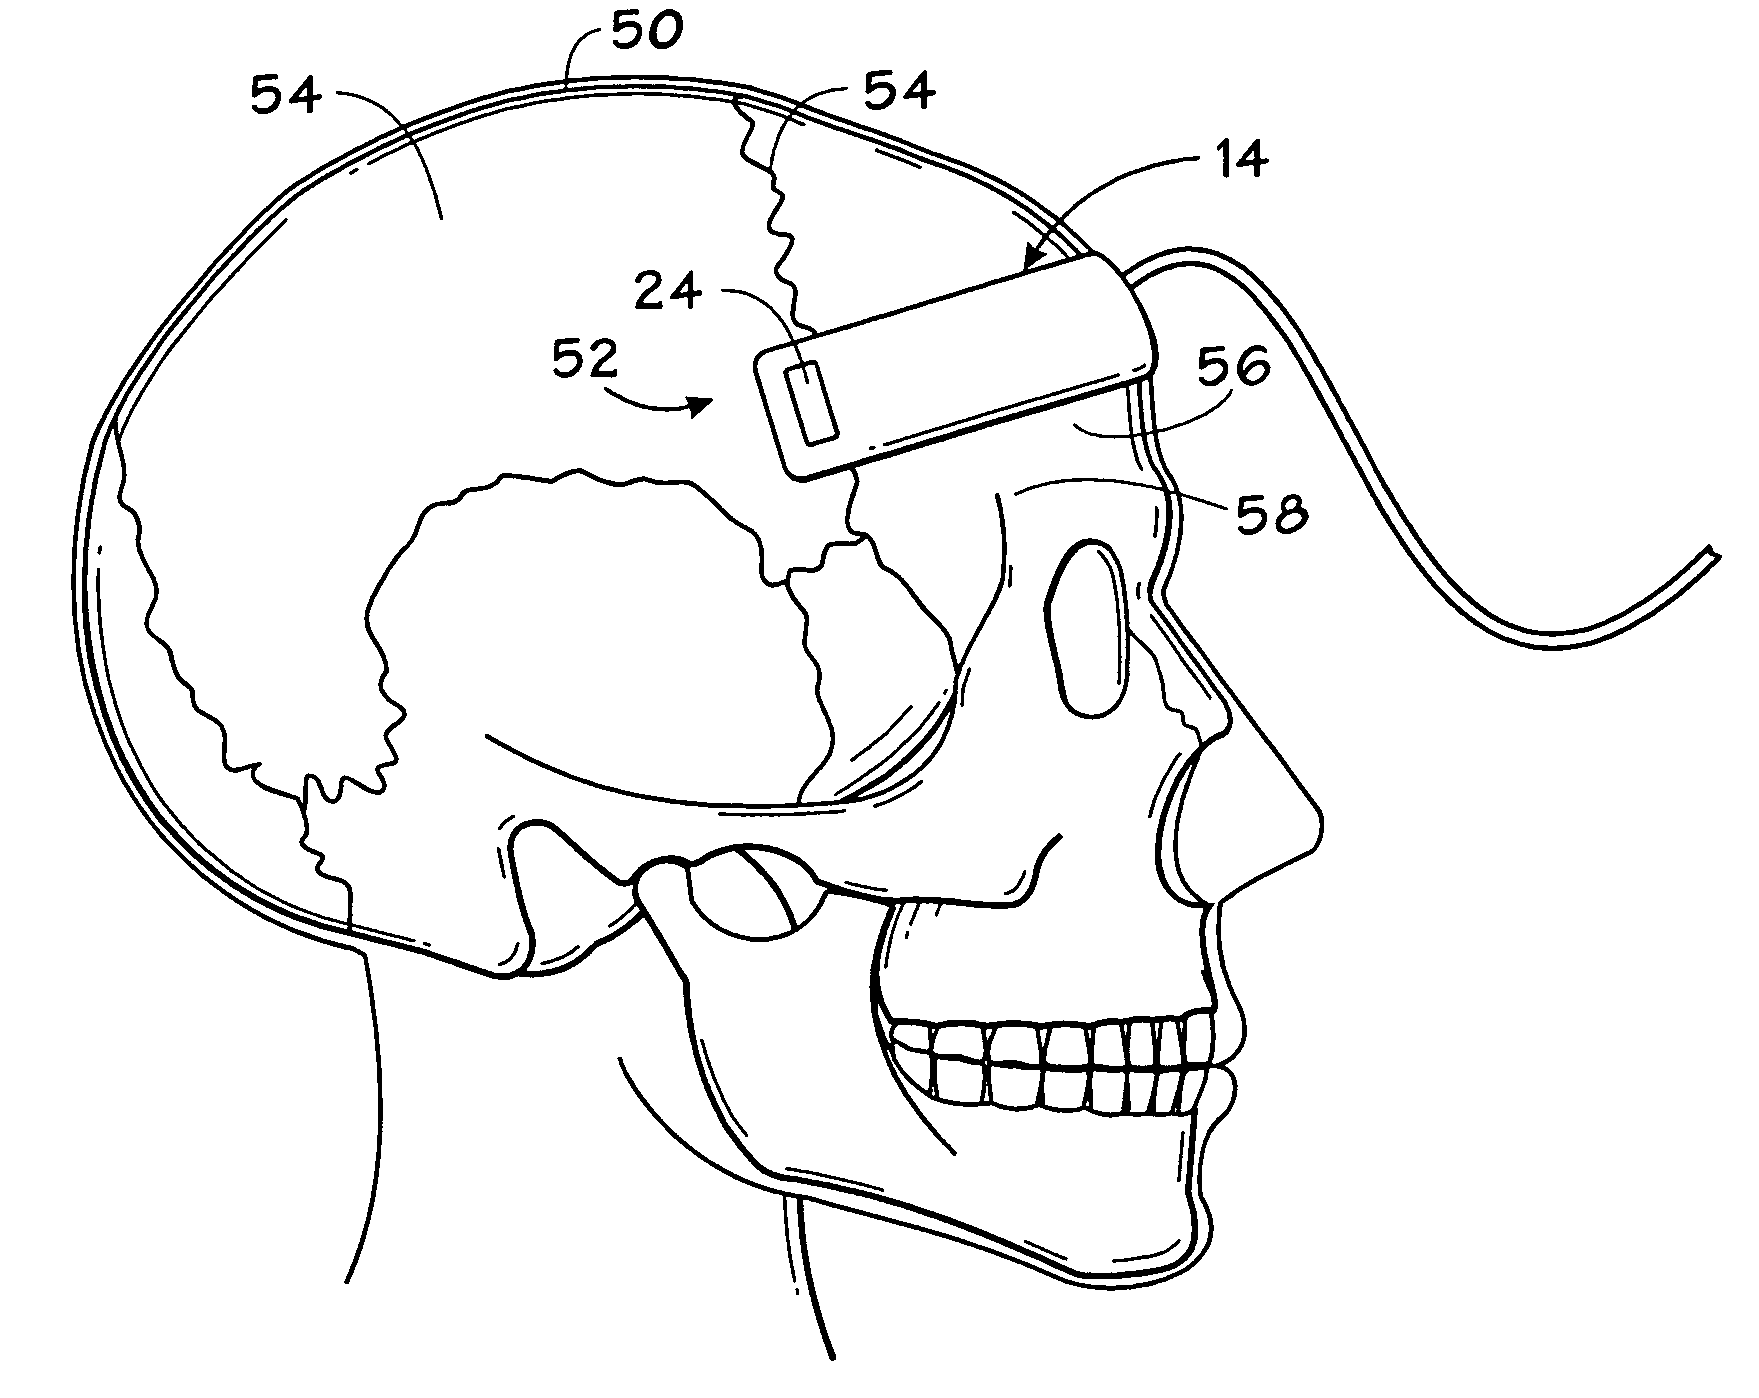 System and method for detection of brain edema using spectrophotometry